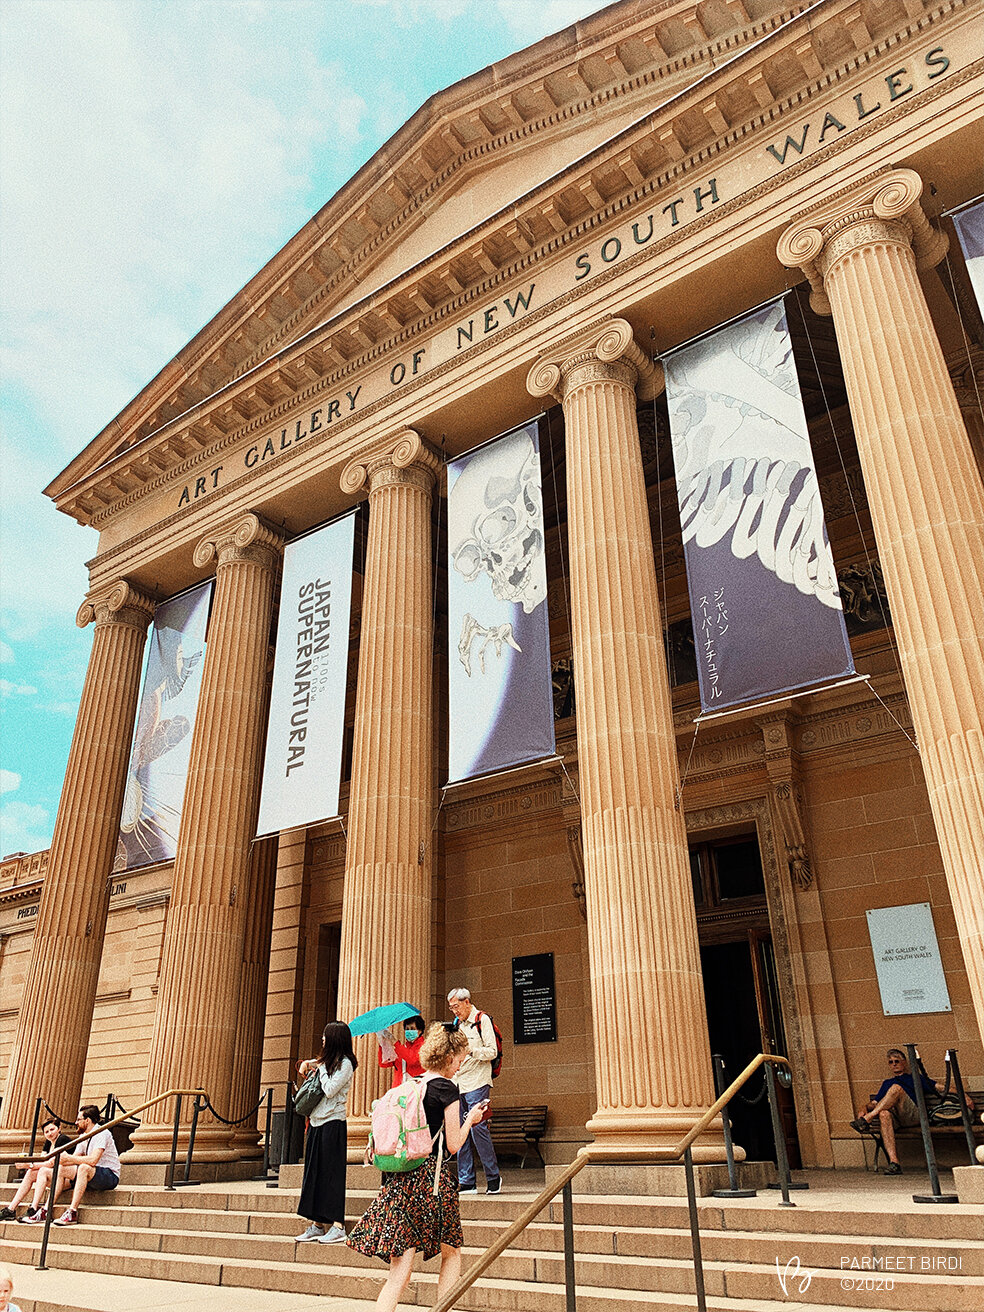  Art Gallery of New South Wales 